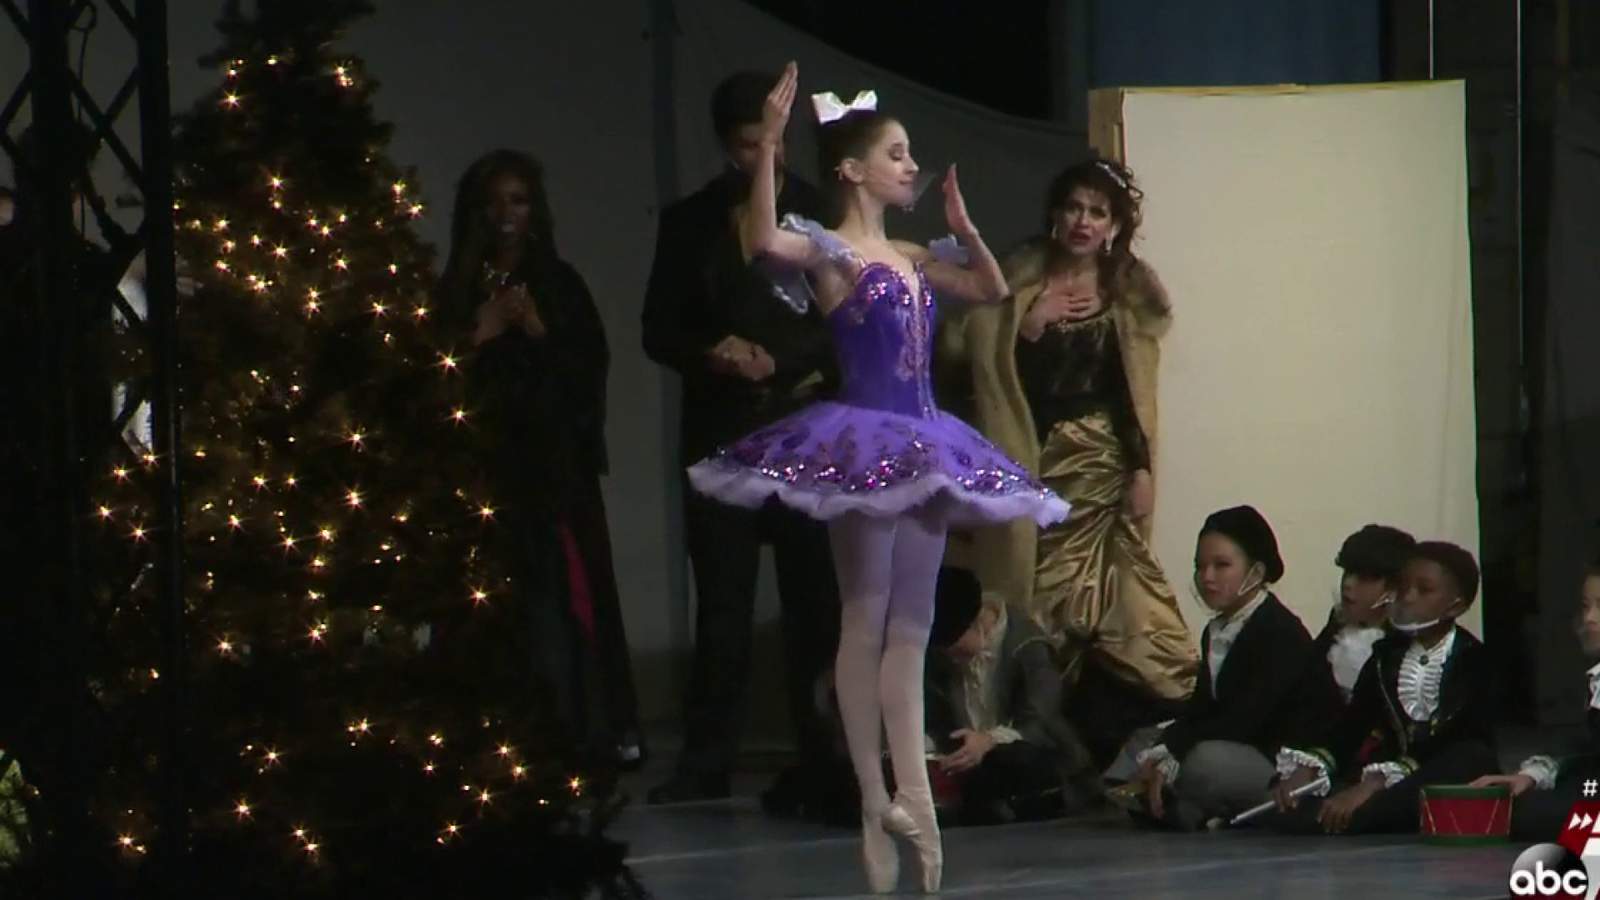 Enjoy ‘Nutcracker: Under the Stars’ live performance from the comfort of your vehicle